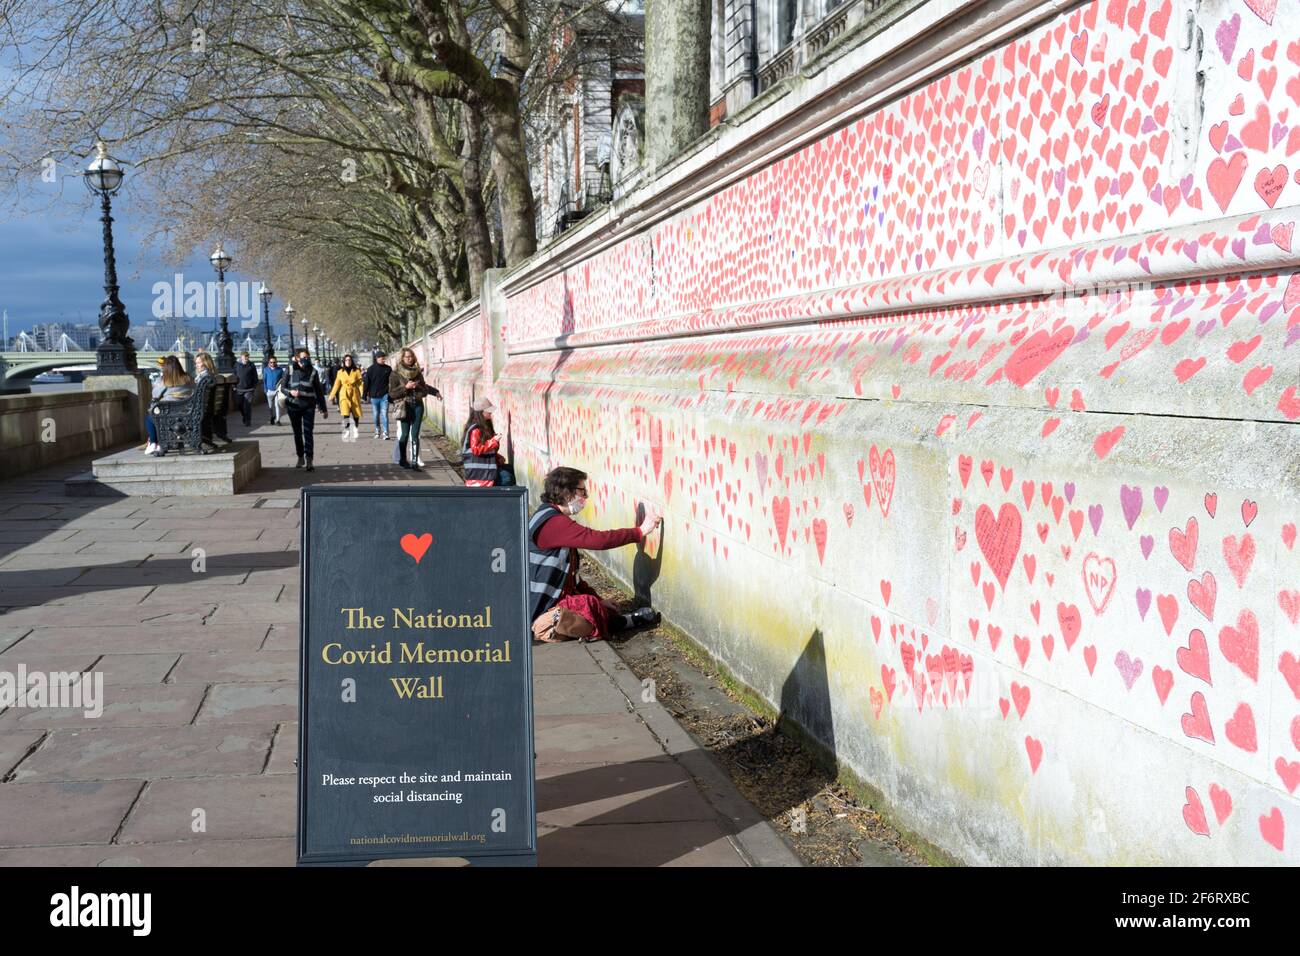 Die nationale Gedenkmauer, London South Bank, England Stockfoto